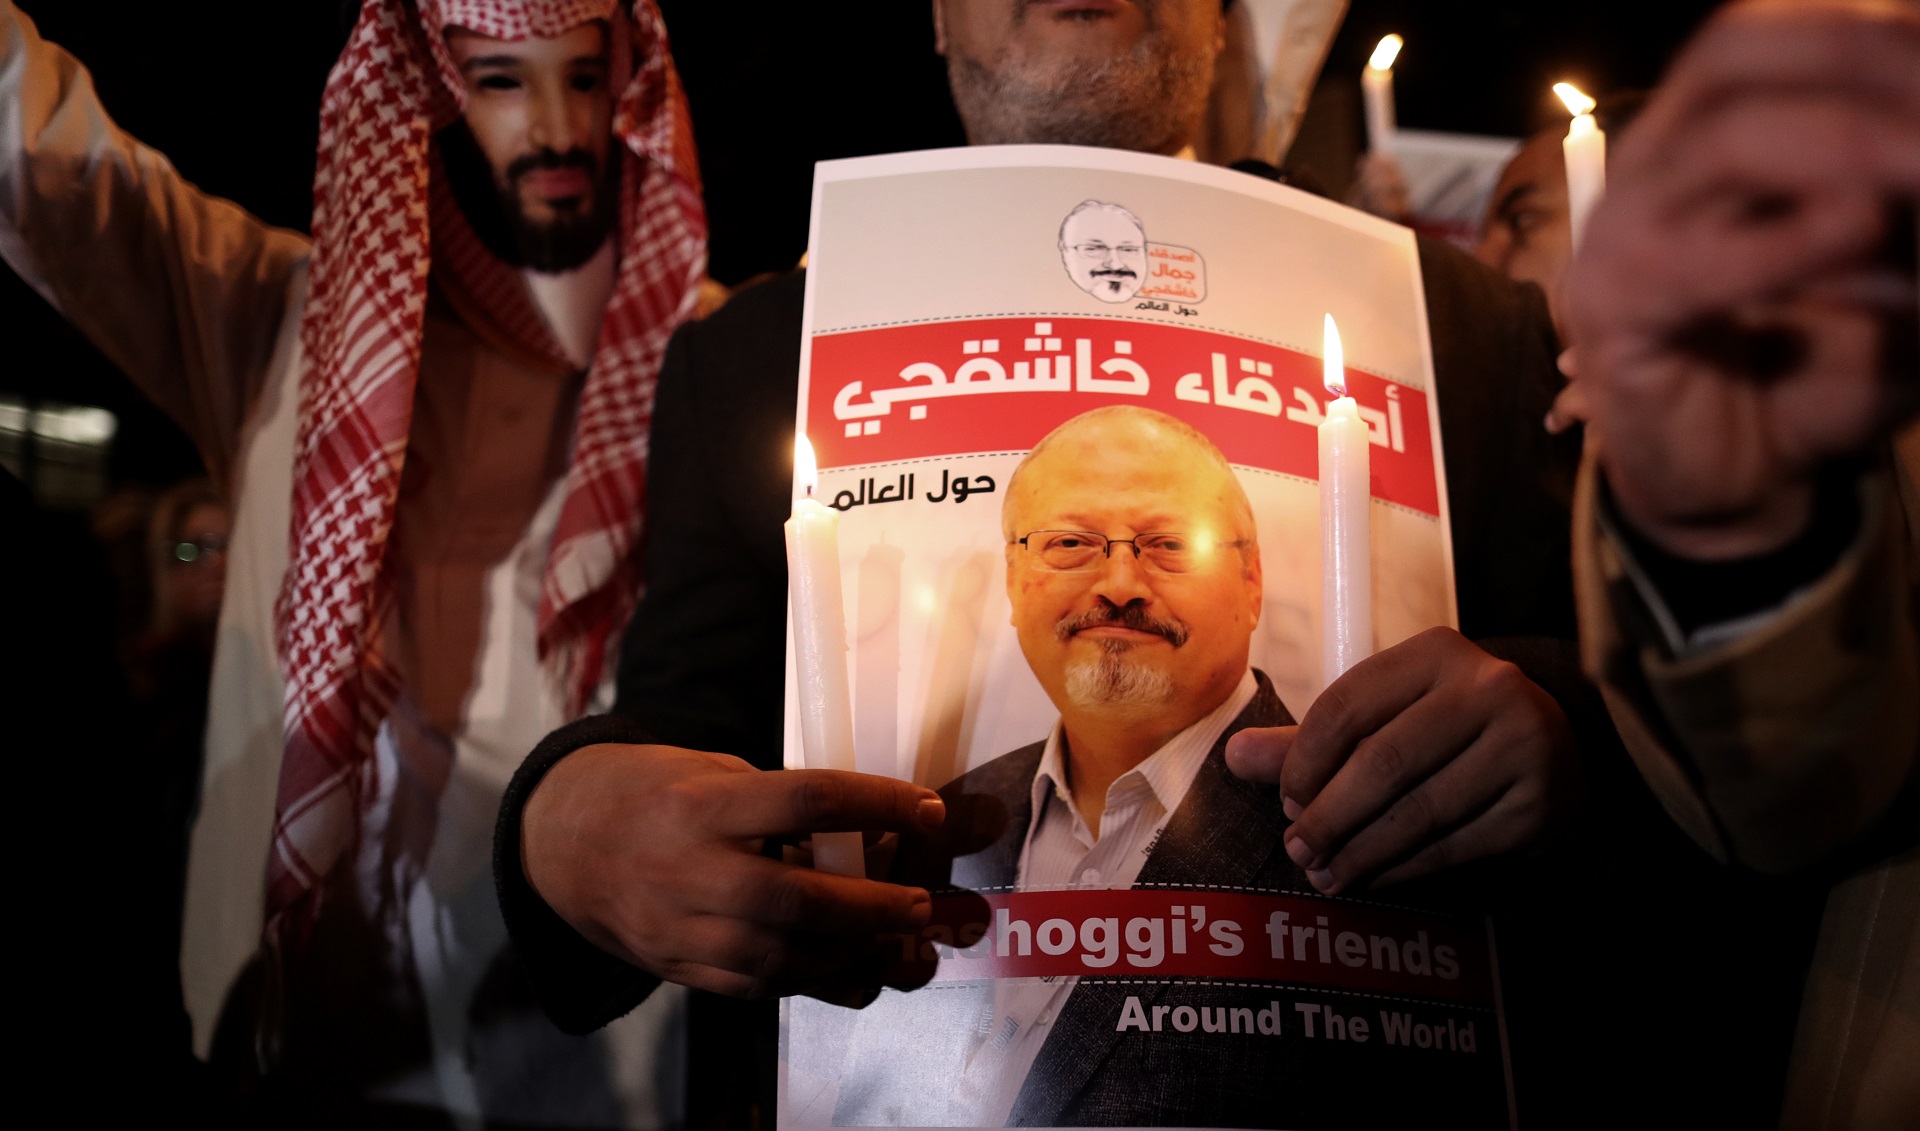 epa08522788 (FILE) - A protestor (L) wears a mask of Saudi Crown Prince Mohammad Bin Salman with a red painted hands while others hold images of Saudi journalist Jamal Khashoggi    during a demonstration in front of Saudi Arabian consulate in Istanbul, Turkey, 25 October 2018 (reissued 02 July 2020). Turkey will hold on 03 July 2020 a trial in absentia for 20 suspects, including two former aides to Saudi Crown Prince Mohammed bin Salman (MBS), for the murder of journalist Jamal Khashoggi in October 2018, according to media reports.  EPA/ERDEM SAHIN *** Local Caption *** 55726496